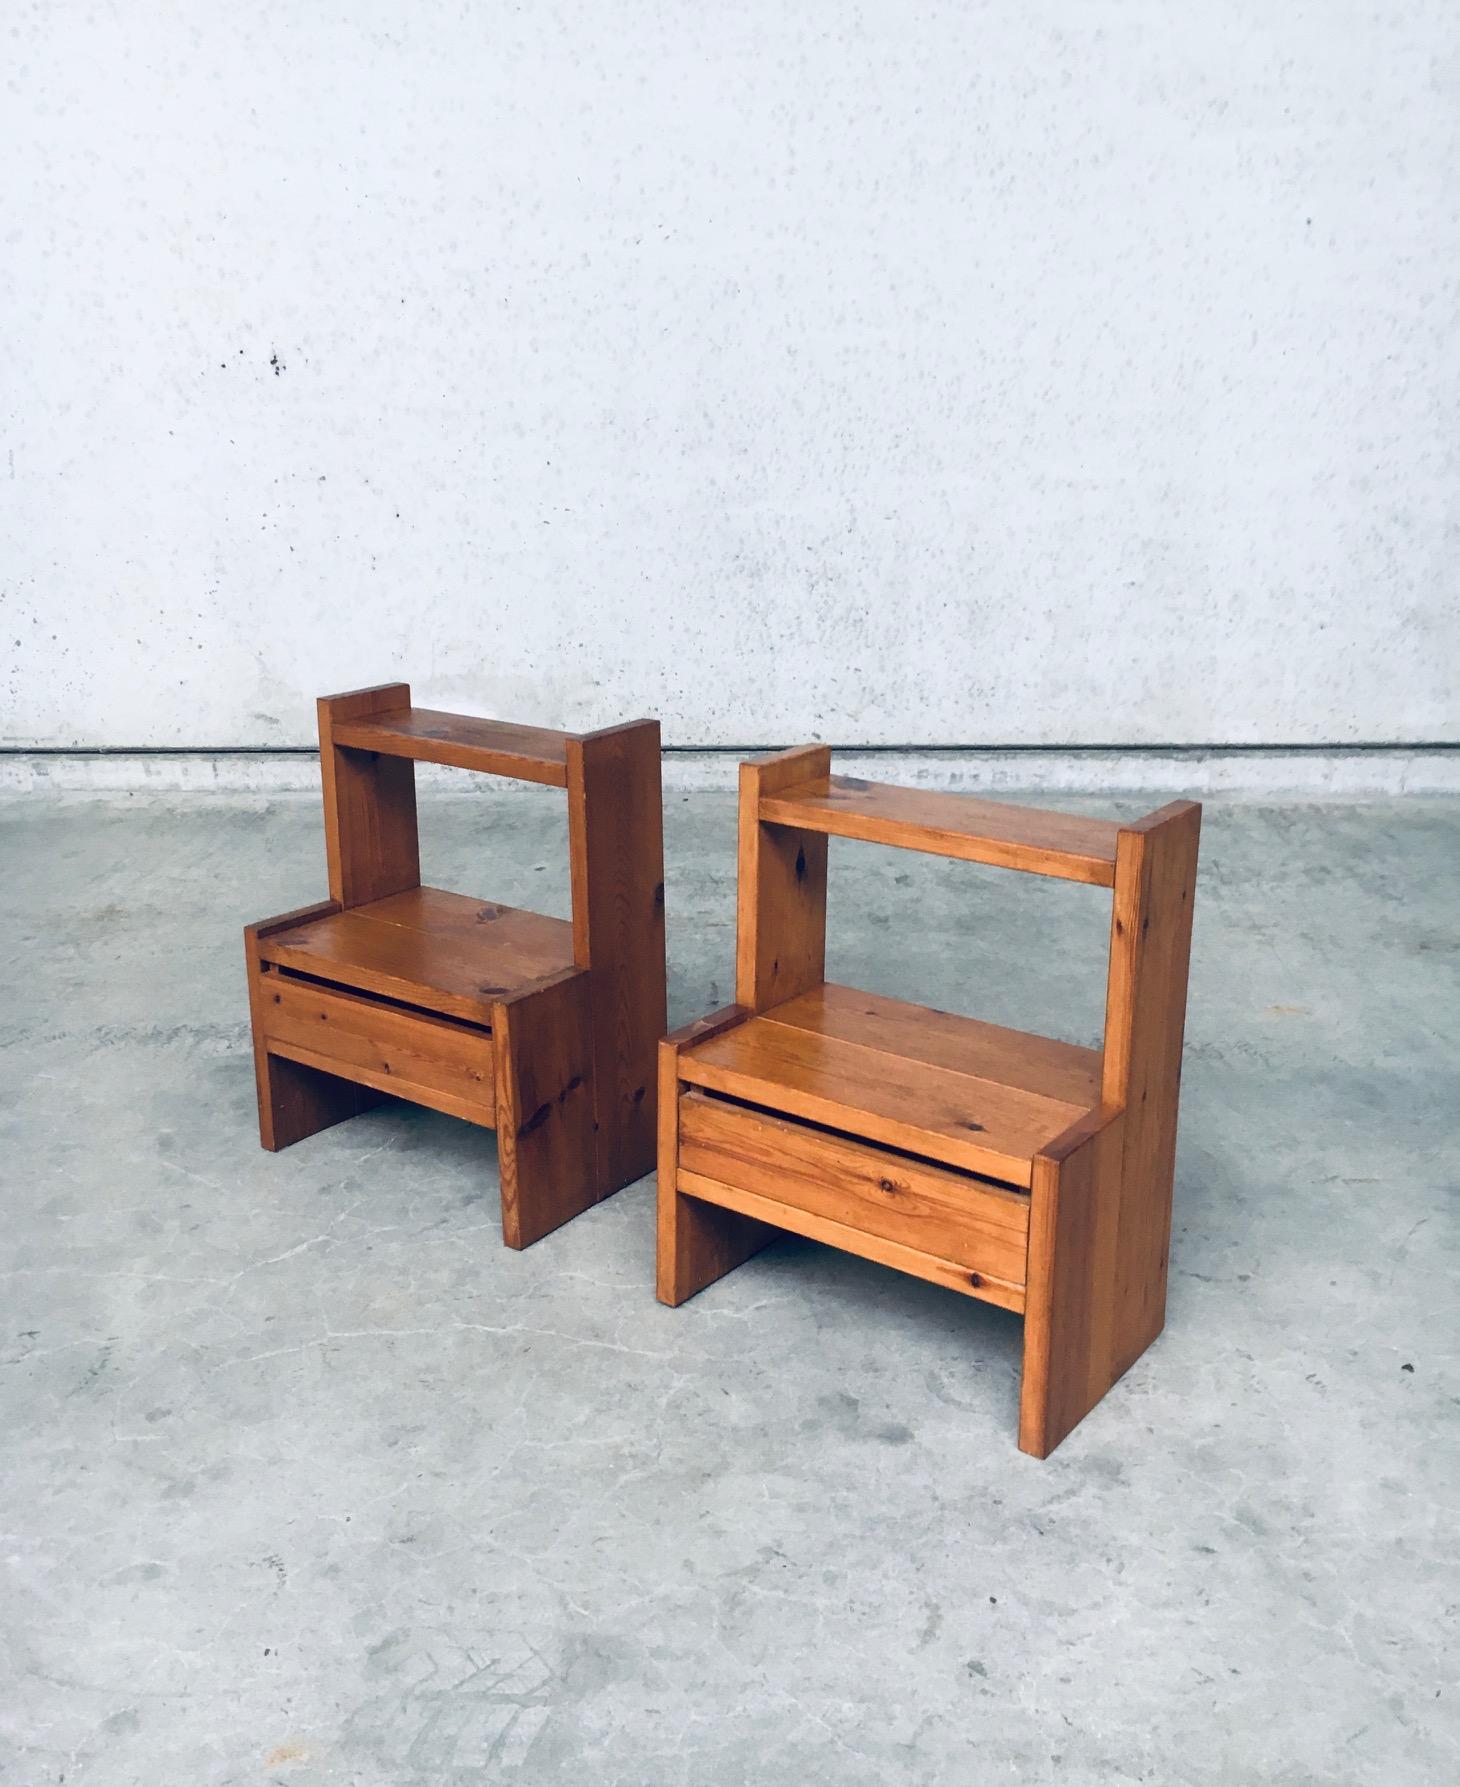 Vintage Midcentury Scandinavian Design pine bedside table Set. Made in Sweden, 1960's. In the style of Rainer Daumiller for Hirtshals Savvaerk. Solid pine constructed side or bedside table set with one drawer that can go in and out both ways, front